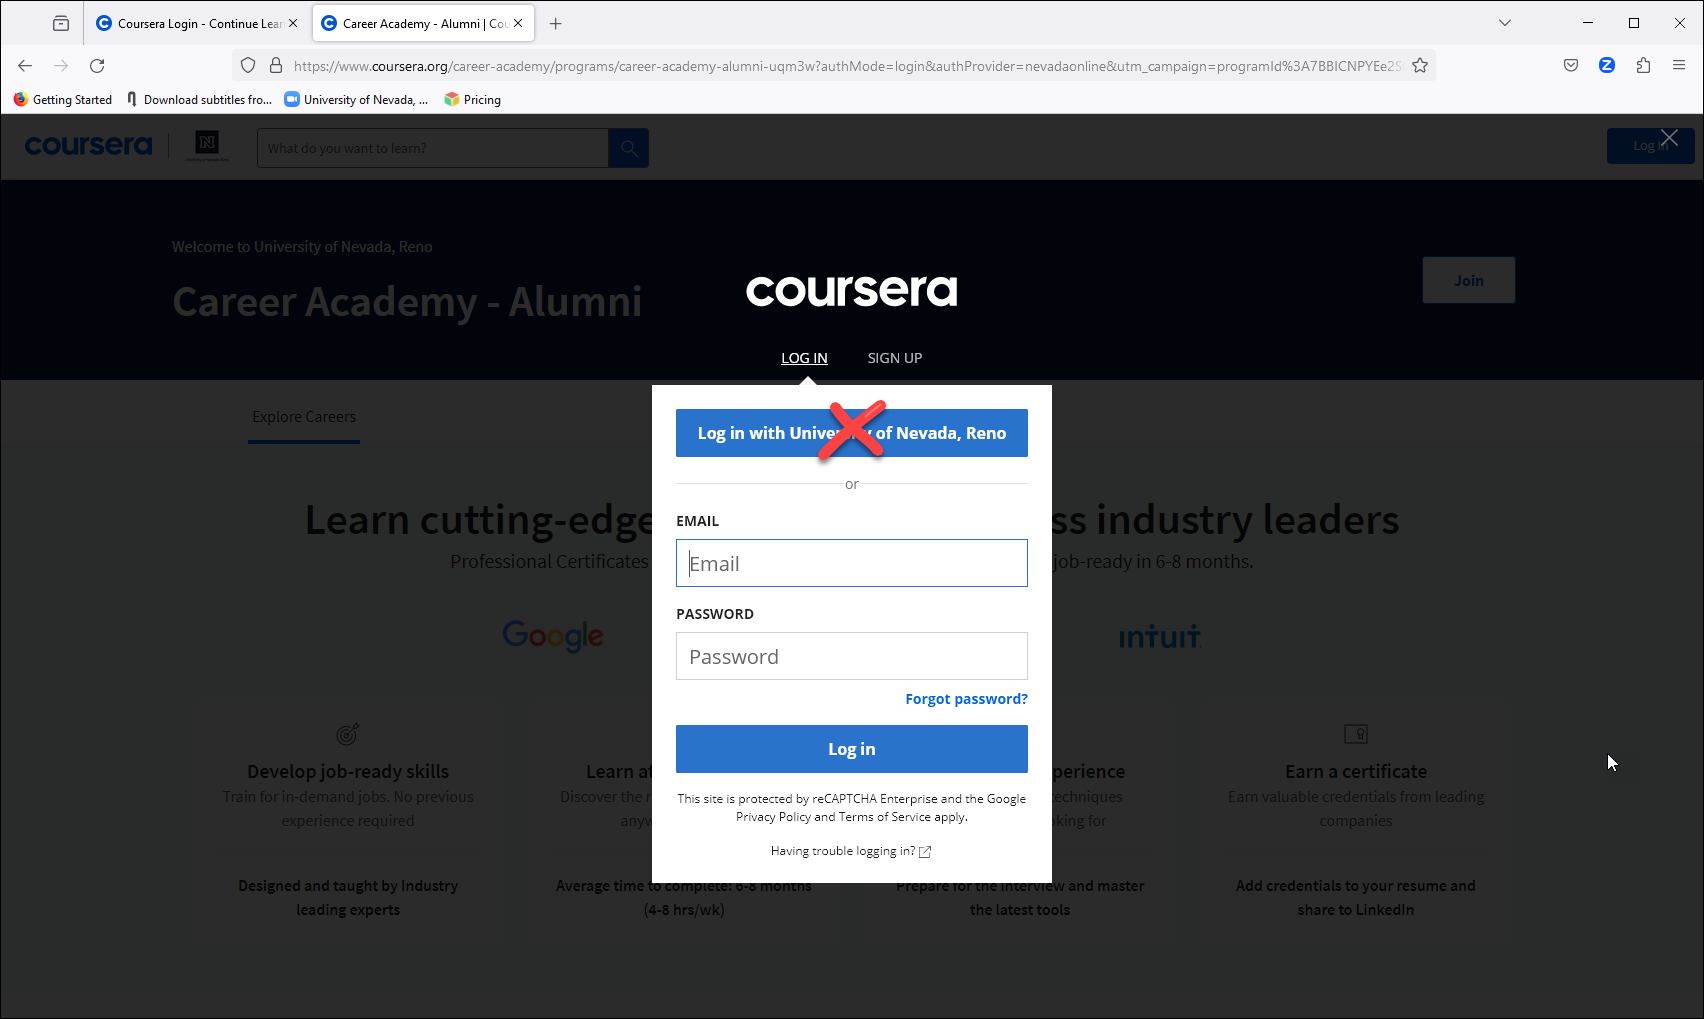 Screen shot of the UNR Coursera interface showing “Login” pop-up. Log in with University of Nevada, Reno has an ‘X’ over it as that option should not be used for alumni access.